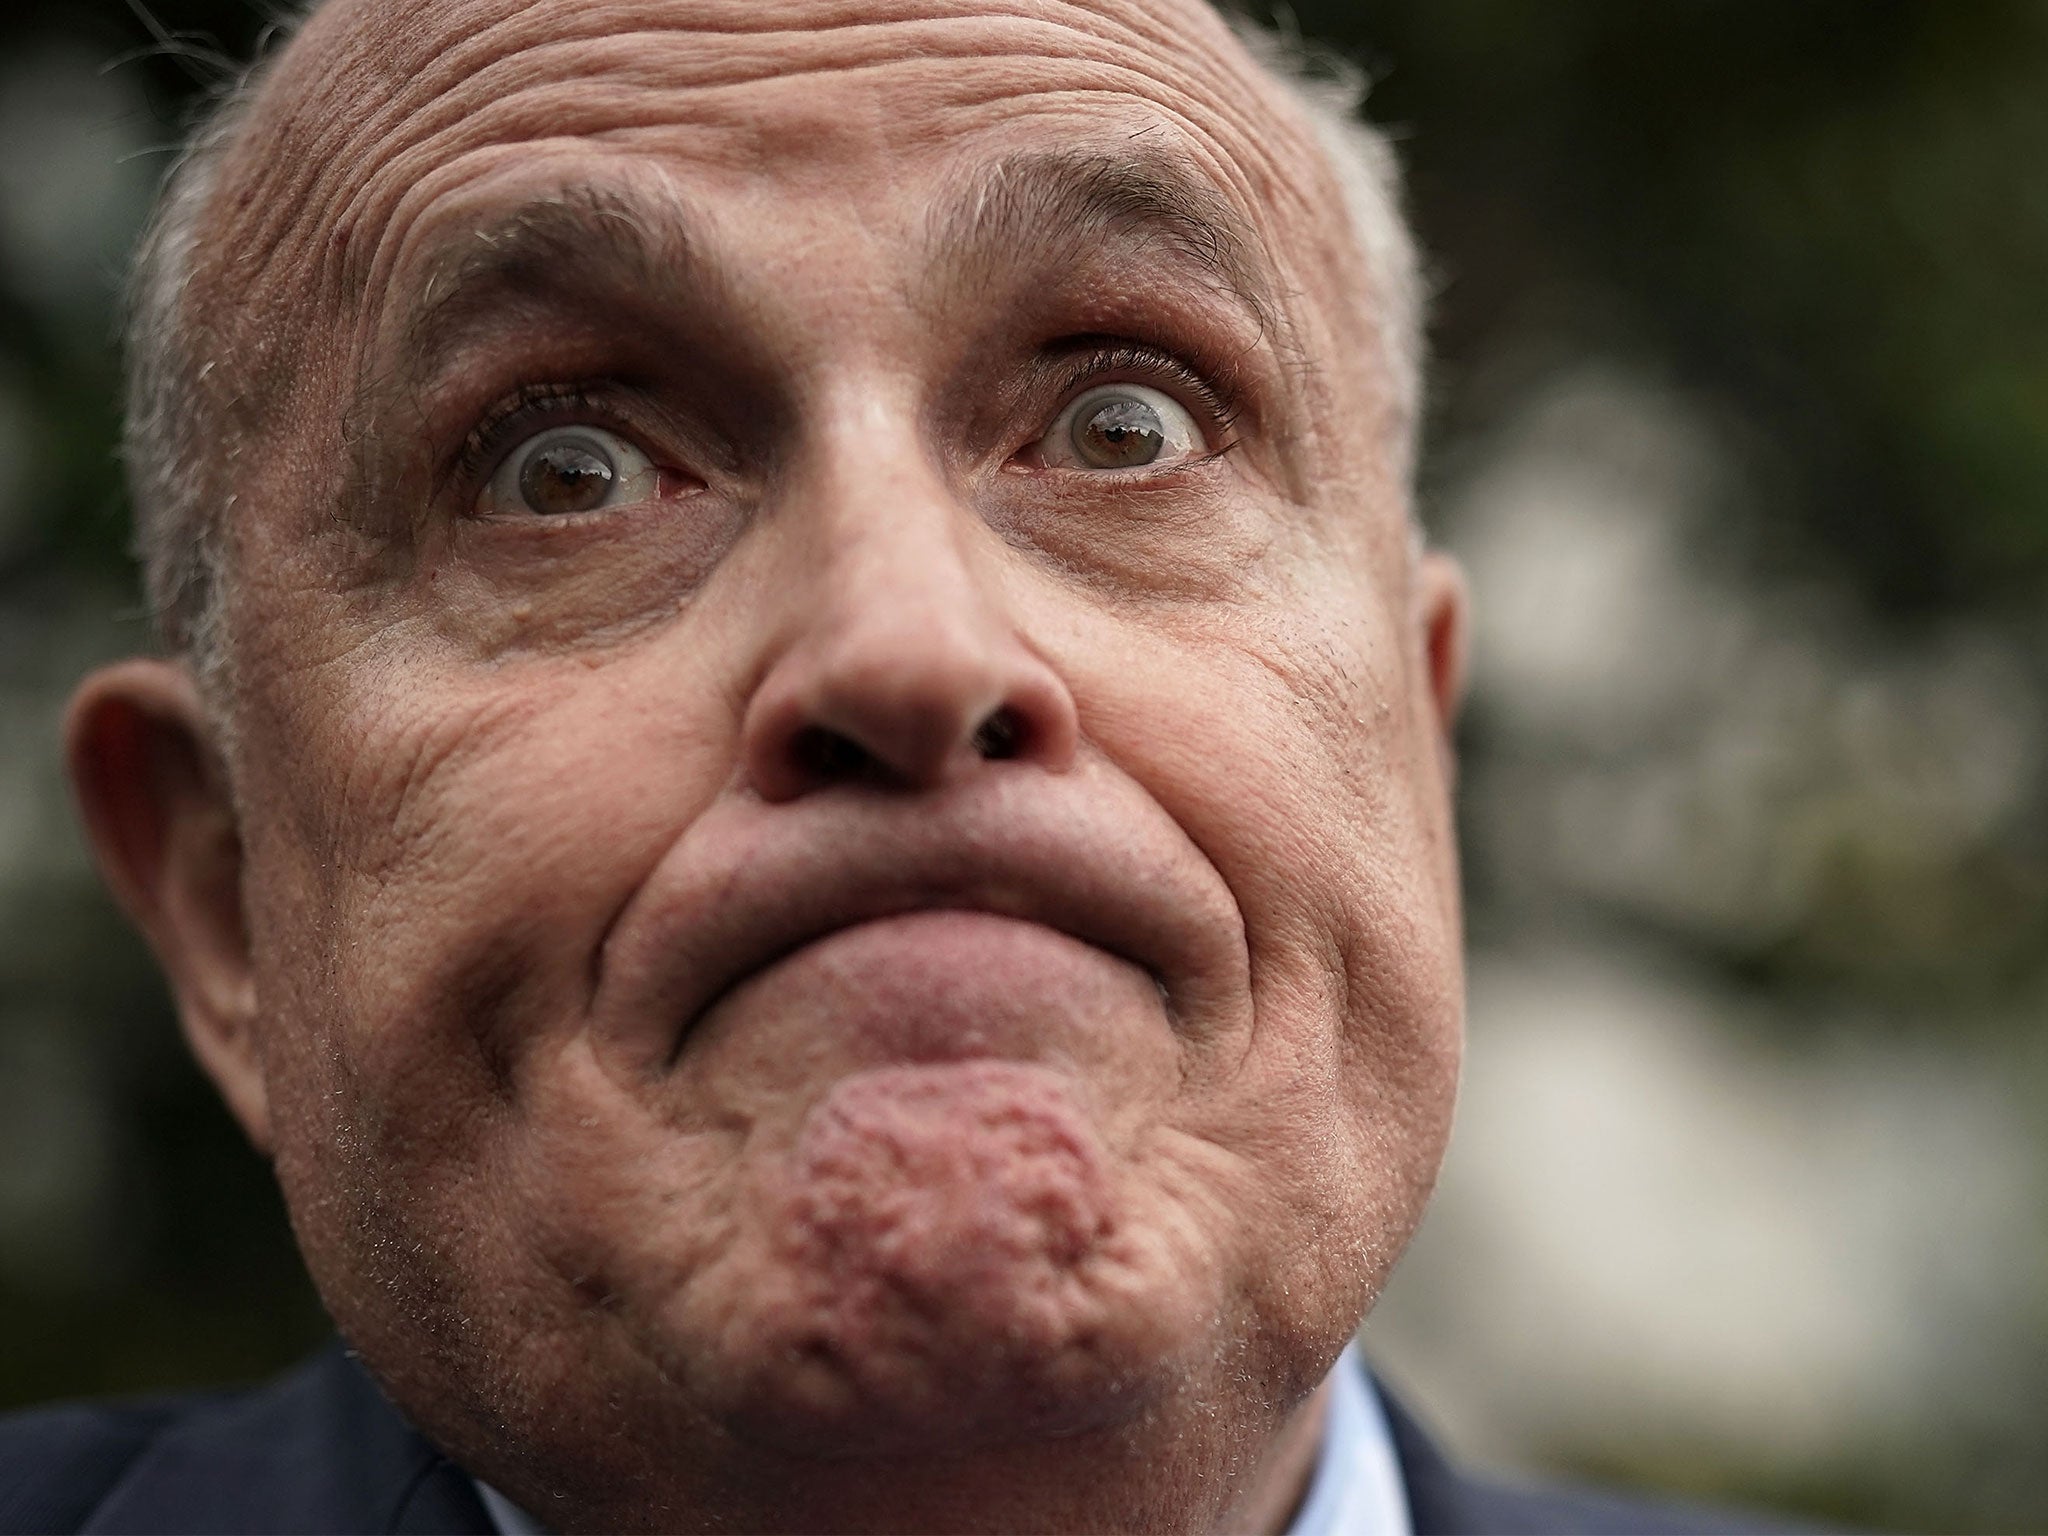 I've had a sneak peek at Rudy Giuliani's Mueller report rebuttal — and Julian Assange says I can tell you all about it